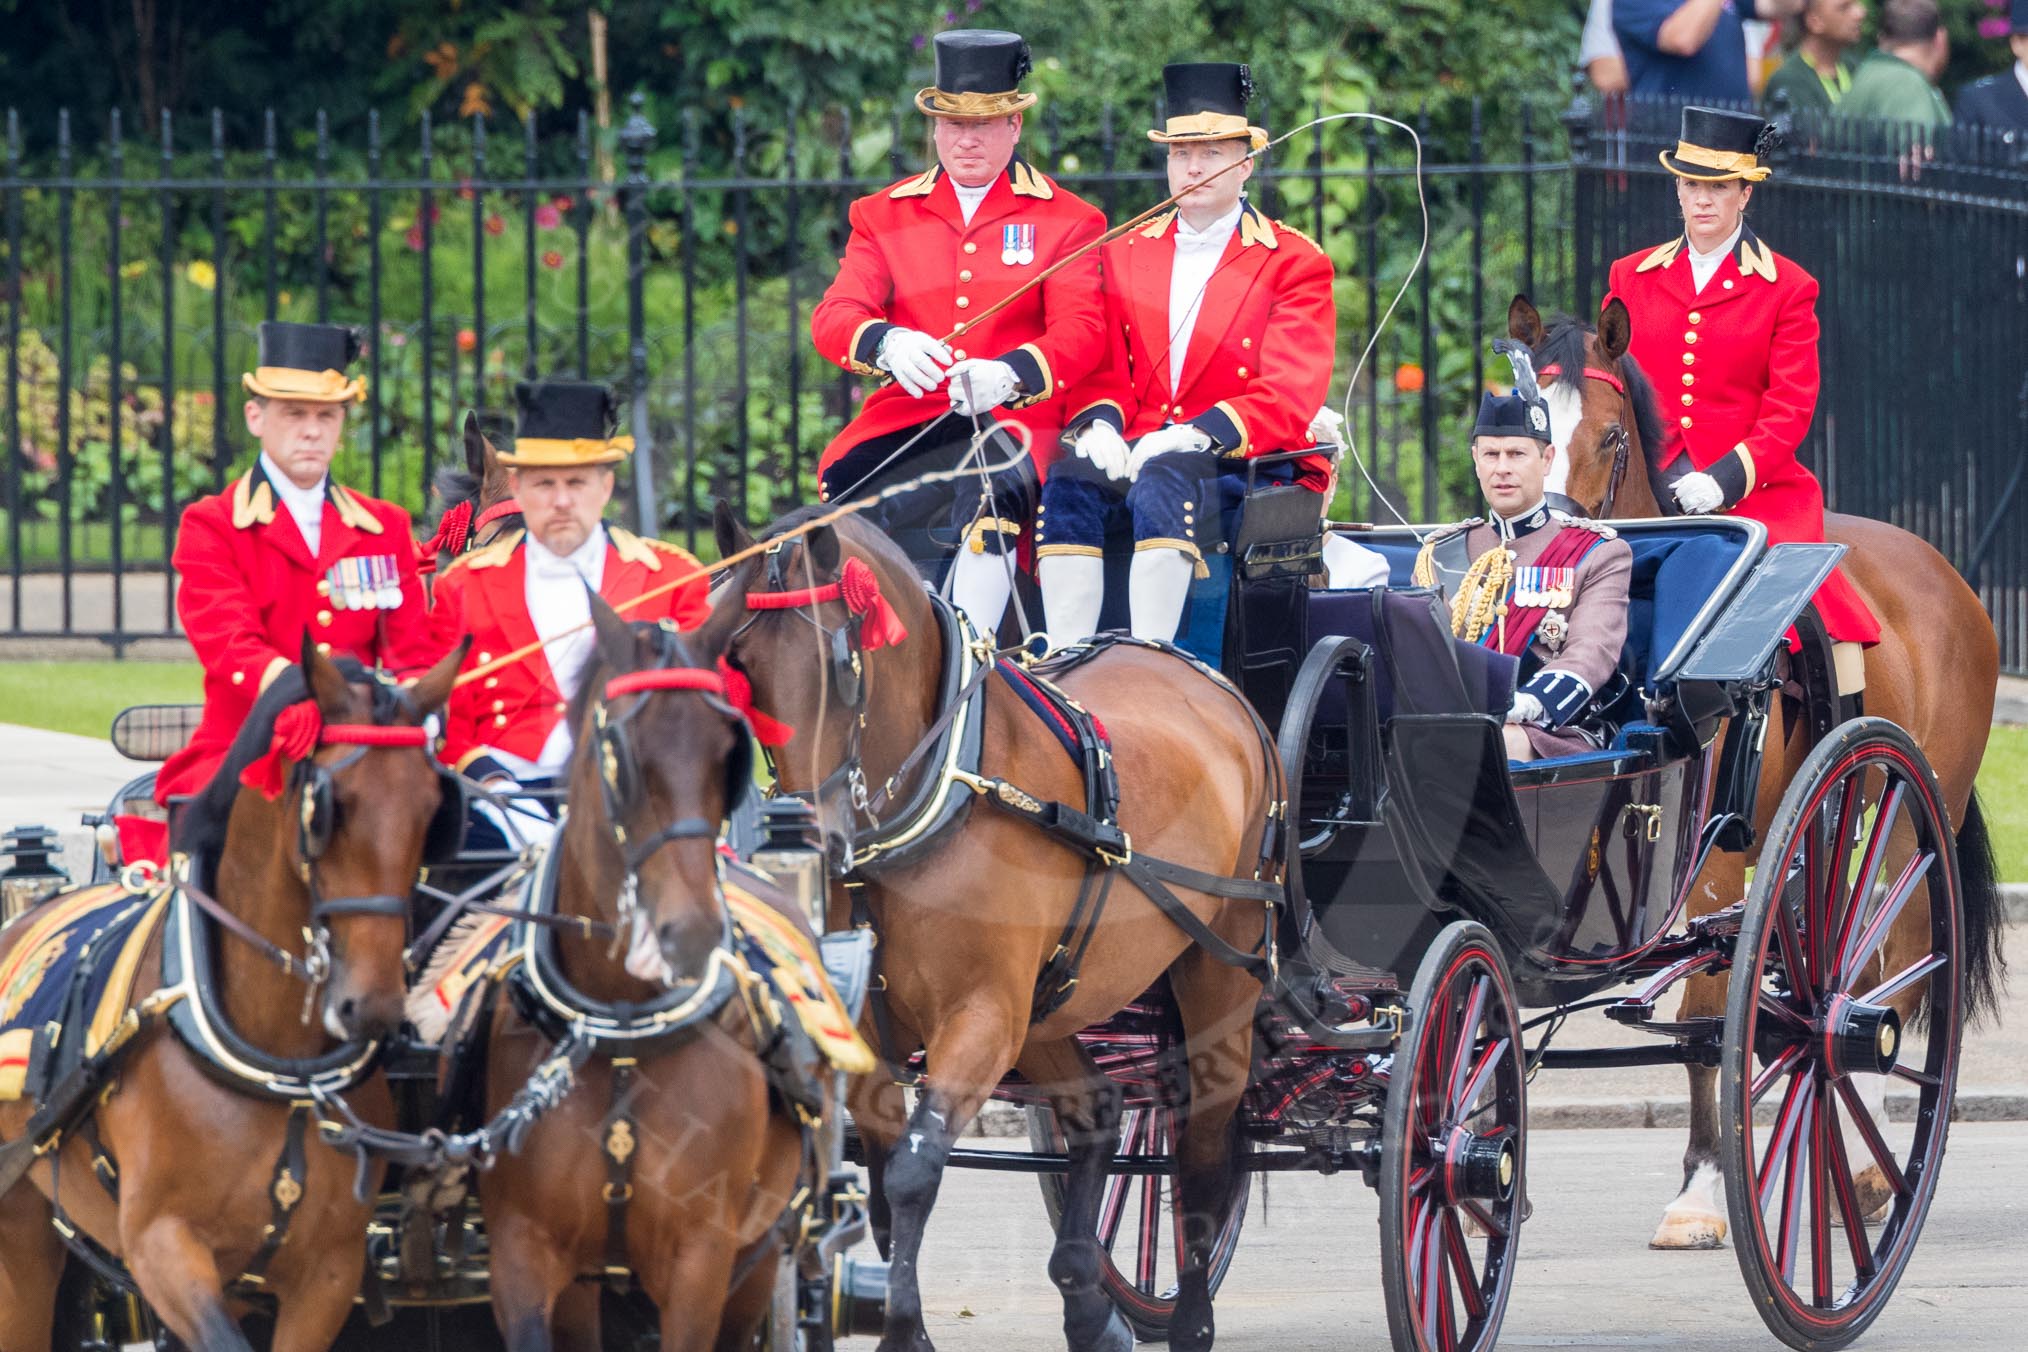 Trooping the Colour 2016.
Horse Guards Parade, Westminster,
London SW1A,
London,
United Kingdom,
on 11 June 2016 at 10:52, image #249